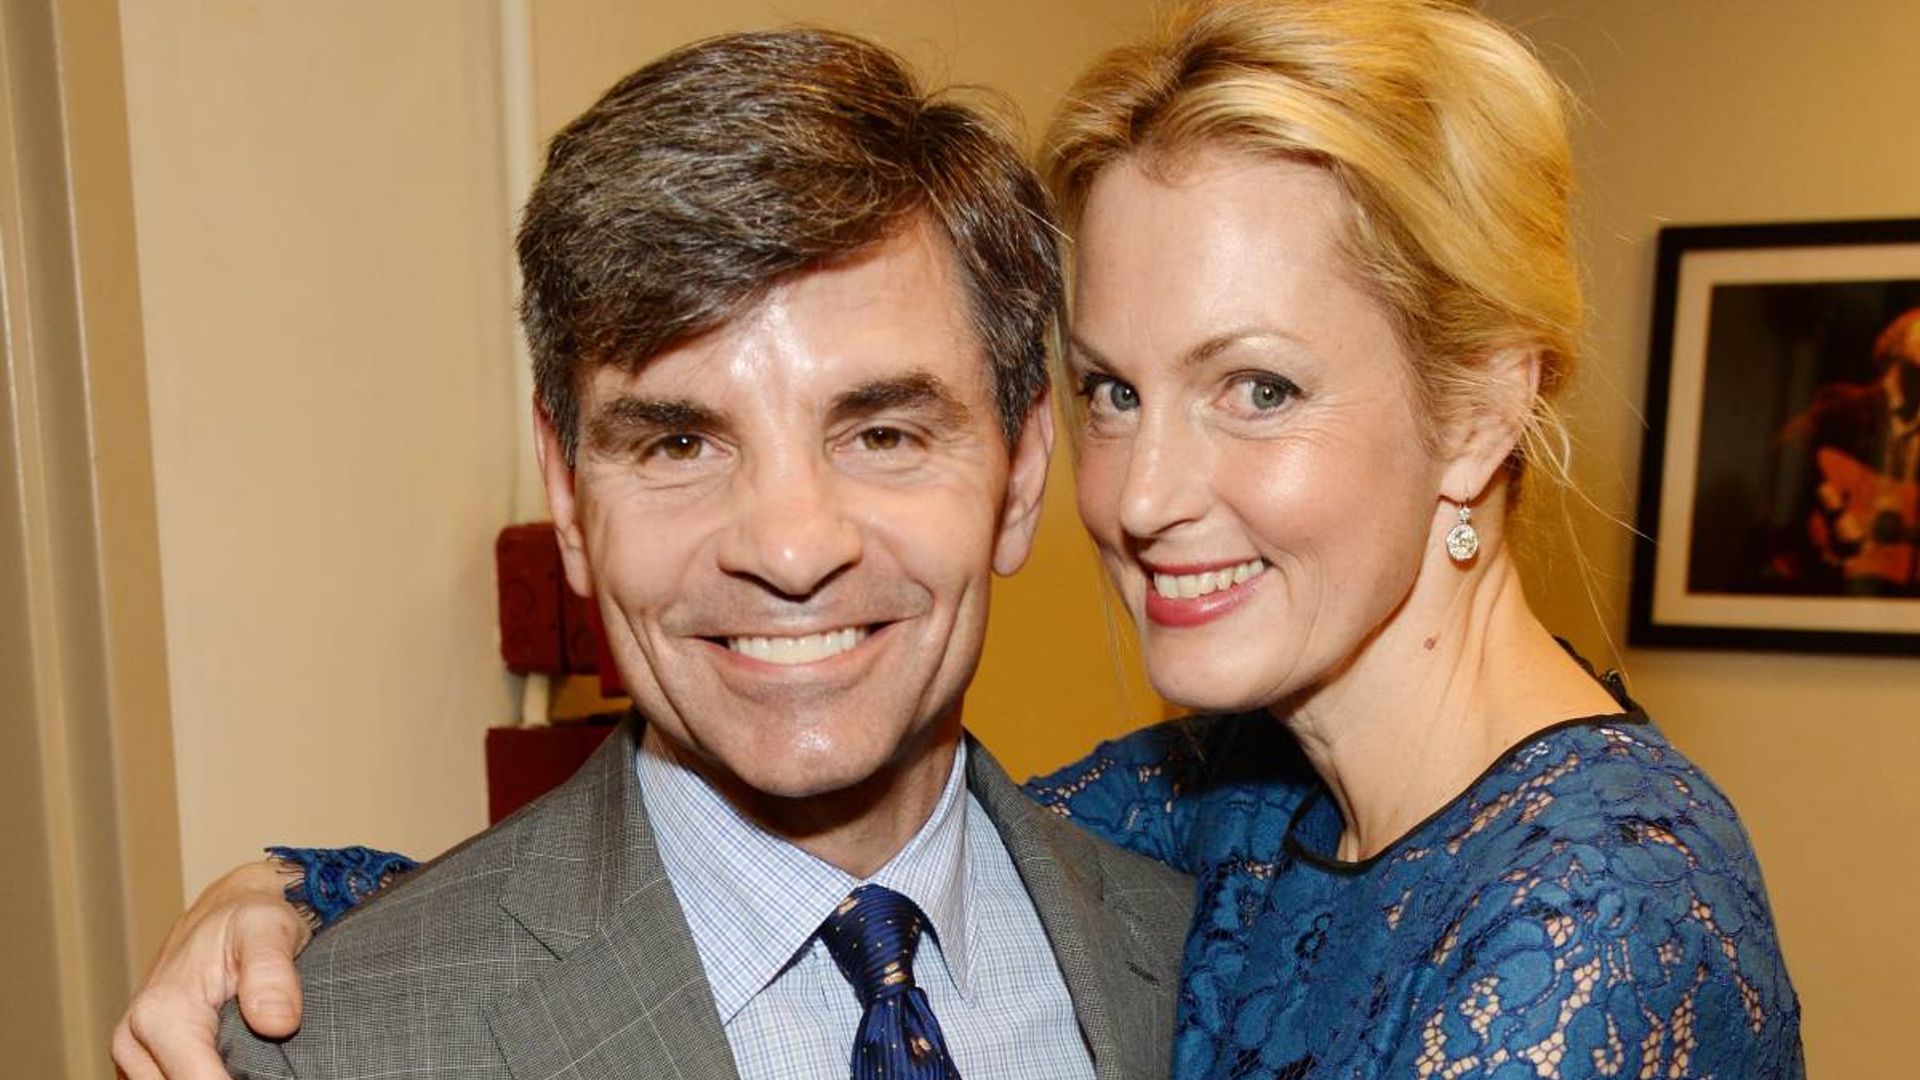 George Stephanopoulos and Ali Wentworth look incredible in celebratory backstage photo